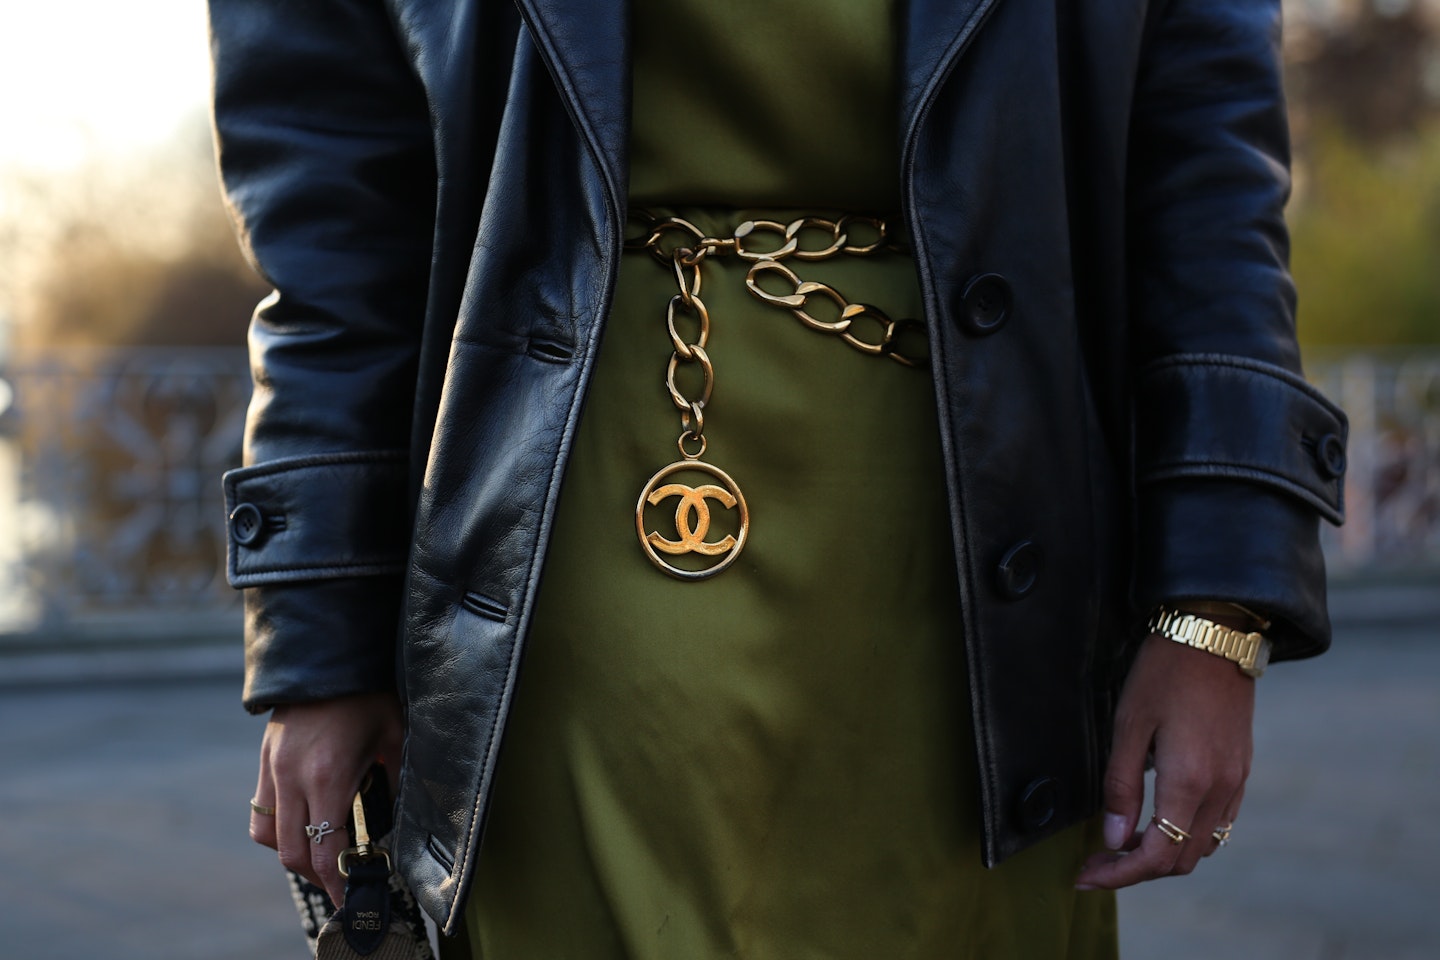 The Chain Belt Trend Is Set to Be Huge